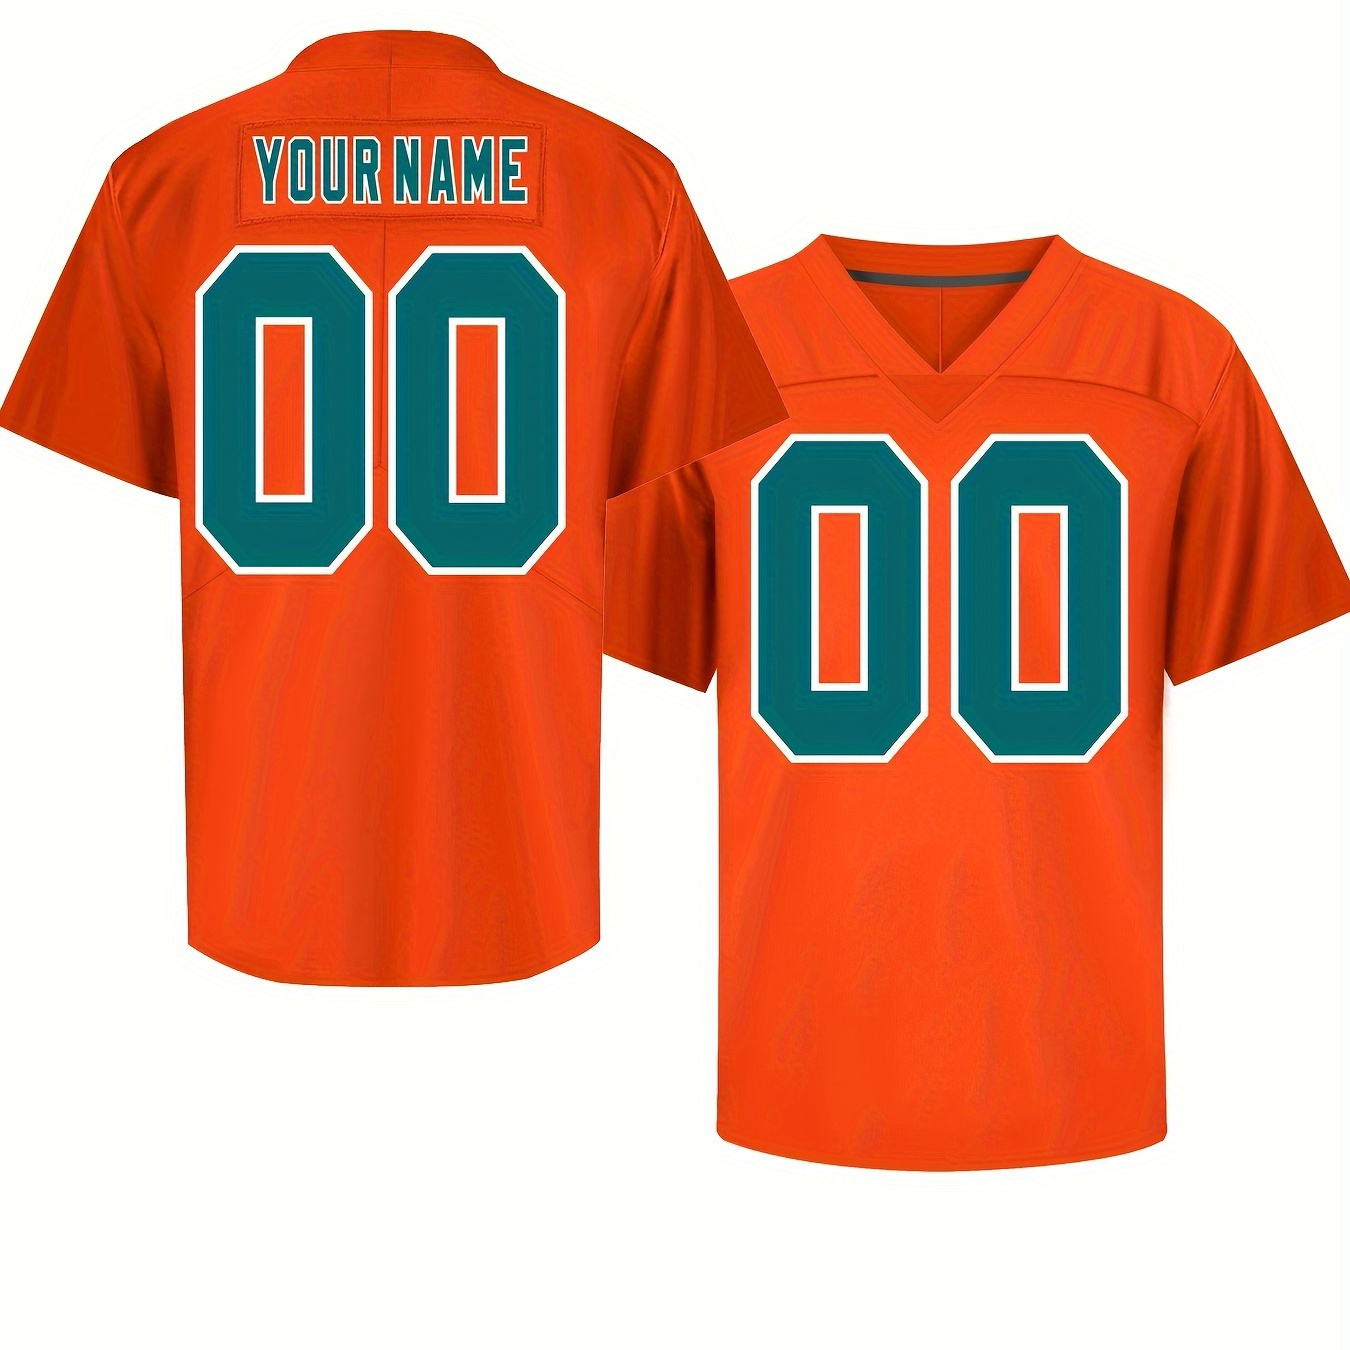 

Customized Name And Number Design, Men's Short Sleeve Loose V-neck Embroidery Personalized American Football Jersey, Outdoor Rugby Jersey For Team Training